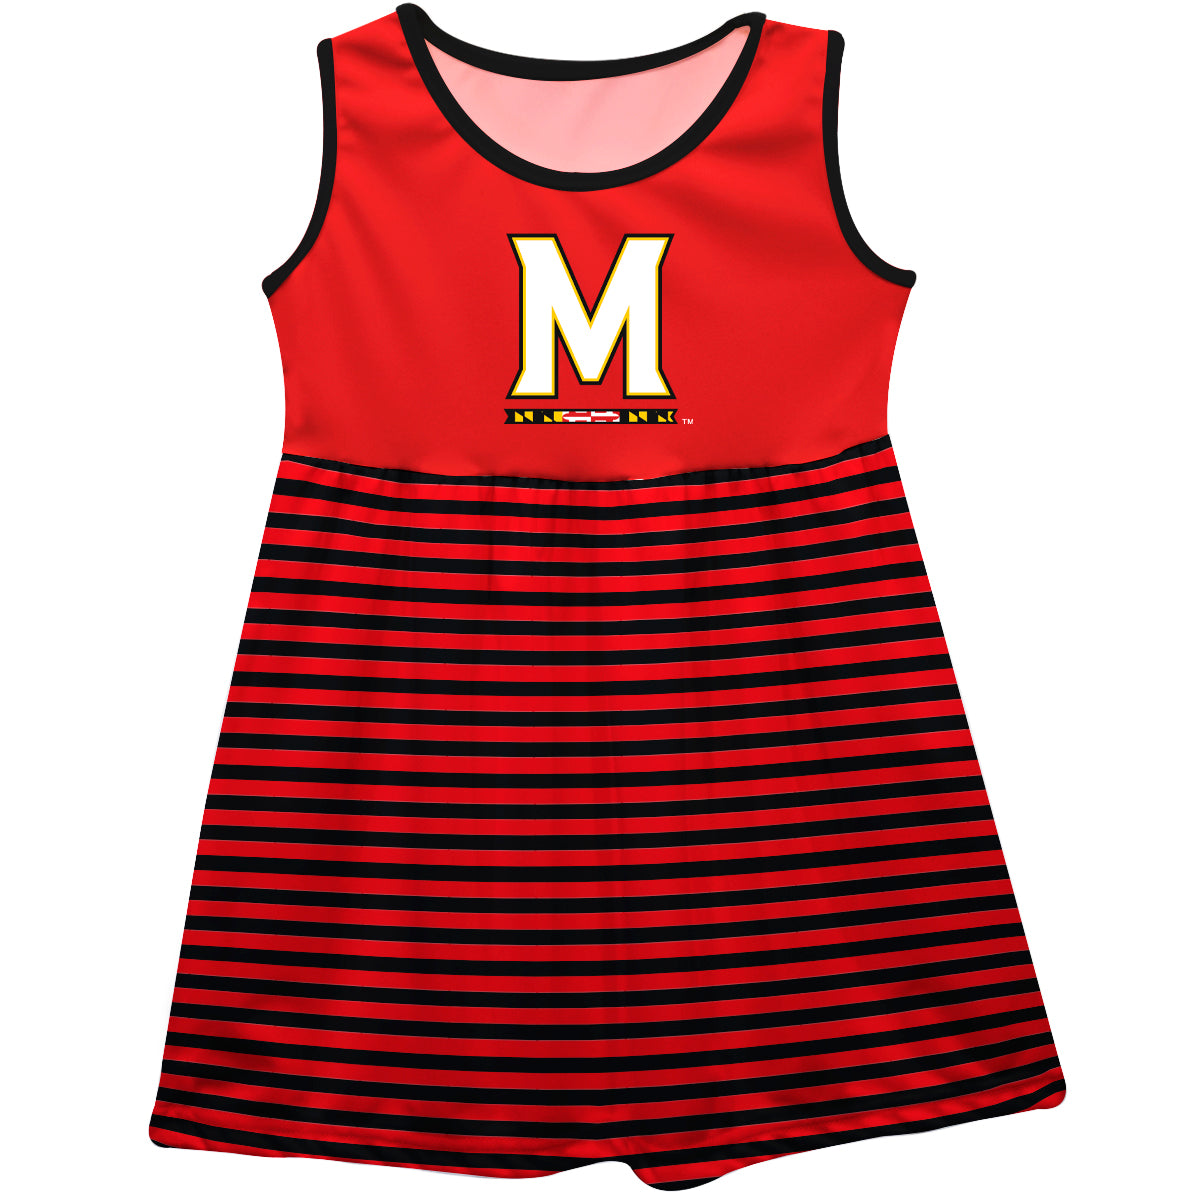 Maryland Terrapins Girls Game Day Sleeveless Tank Dress Solid Red Logo Stripes on Skirt by Vive La Fete-Campus-Wardrobe